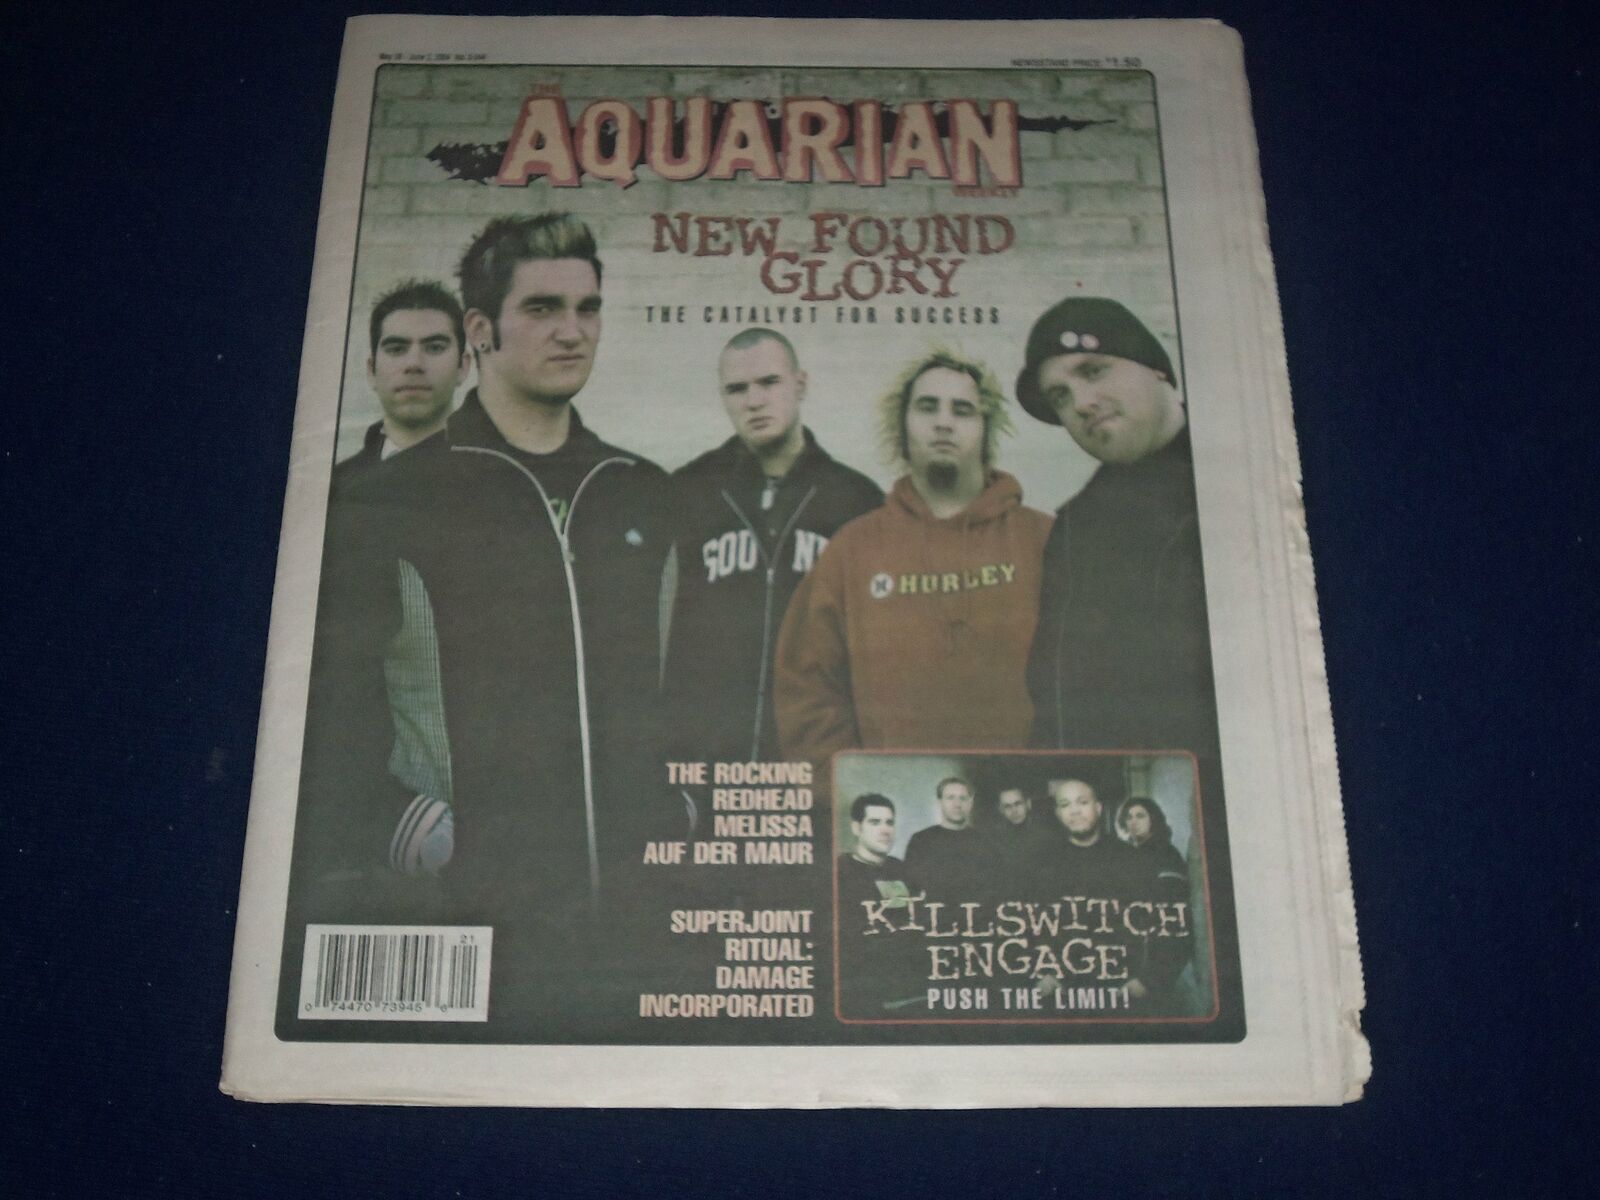 2004 MAY 26-JUNE 2 AQUARIAN WEEKLY NEWSPAPER - NEW FOUND GLORY COVER - J 1093